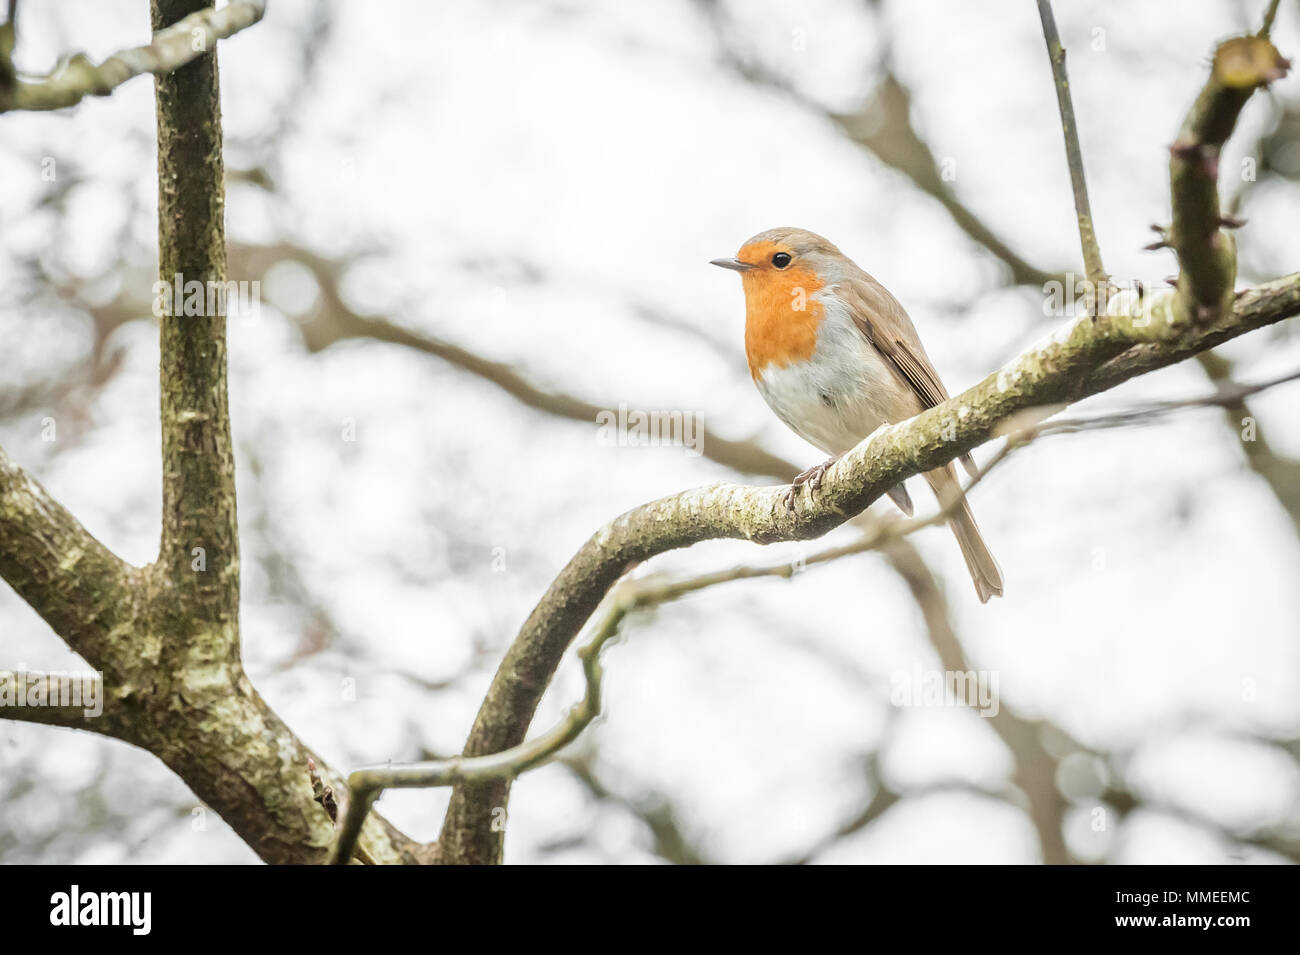 closeup of a garden Robin perched on a small branch Stock Photo